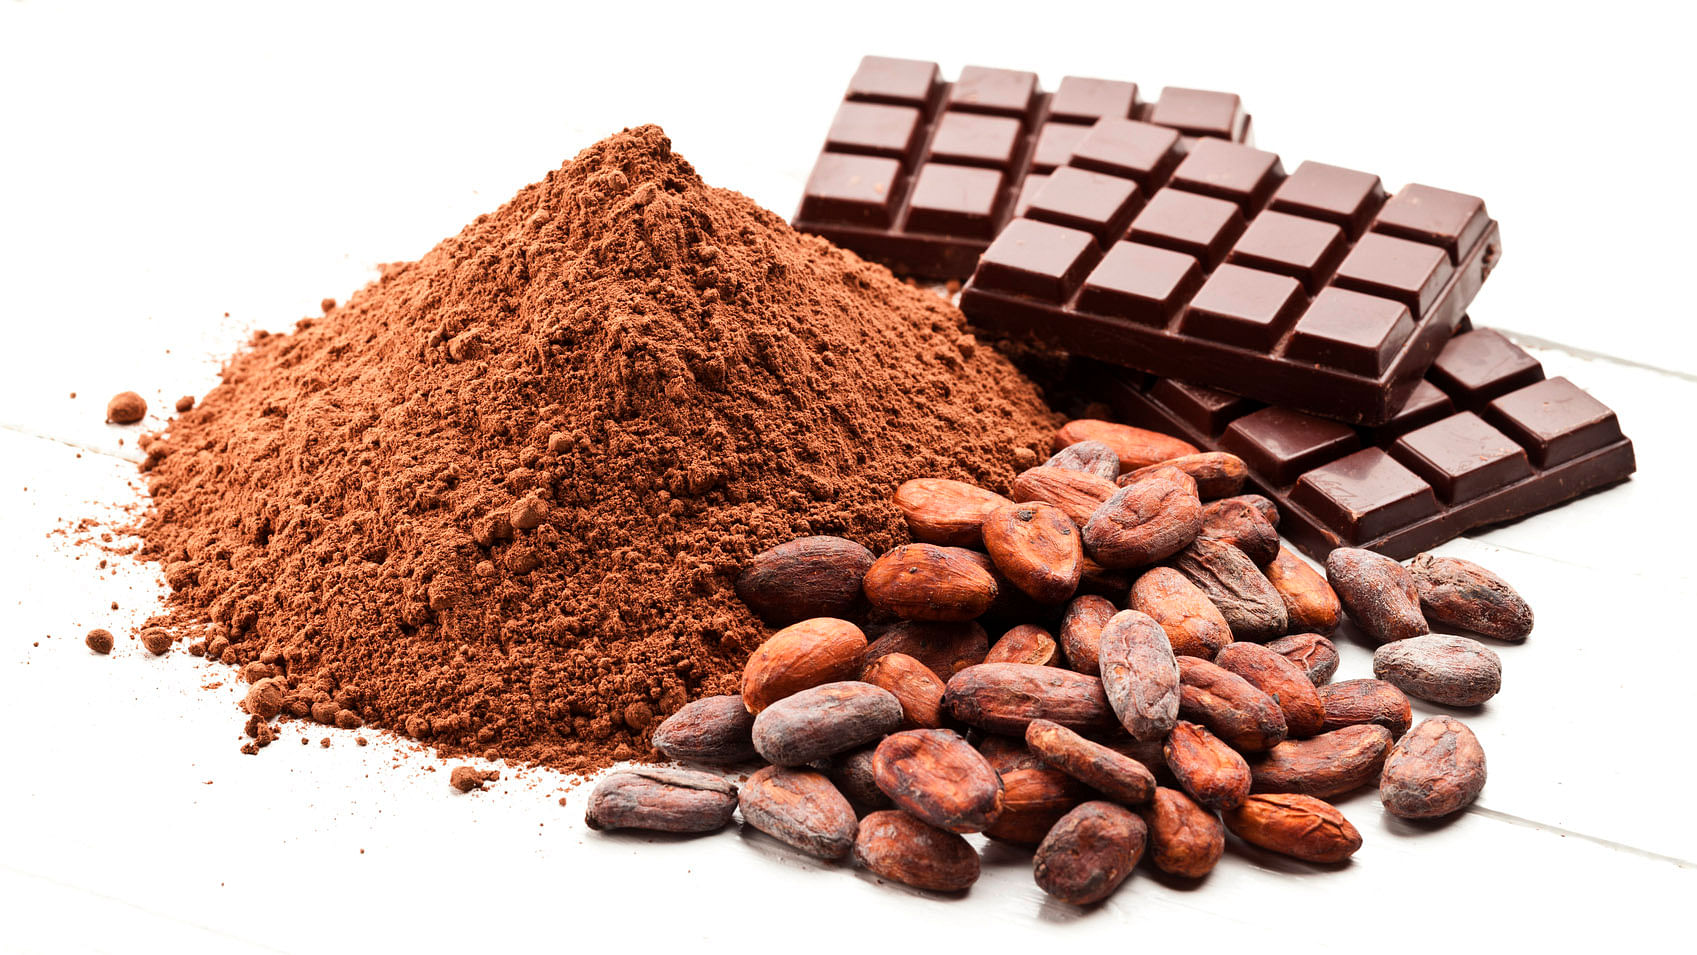  No, chocolate isn’t going extinct by 2050.